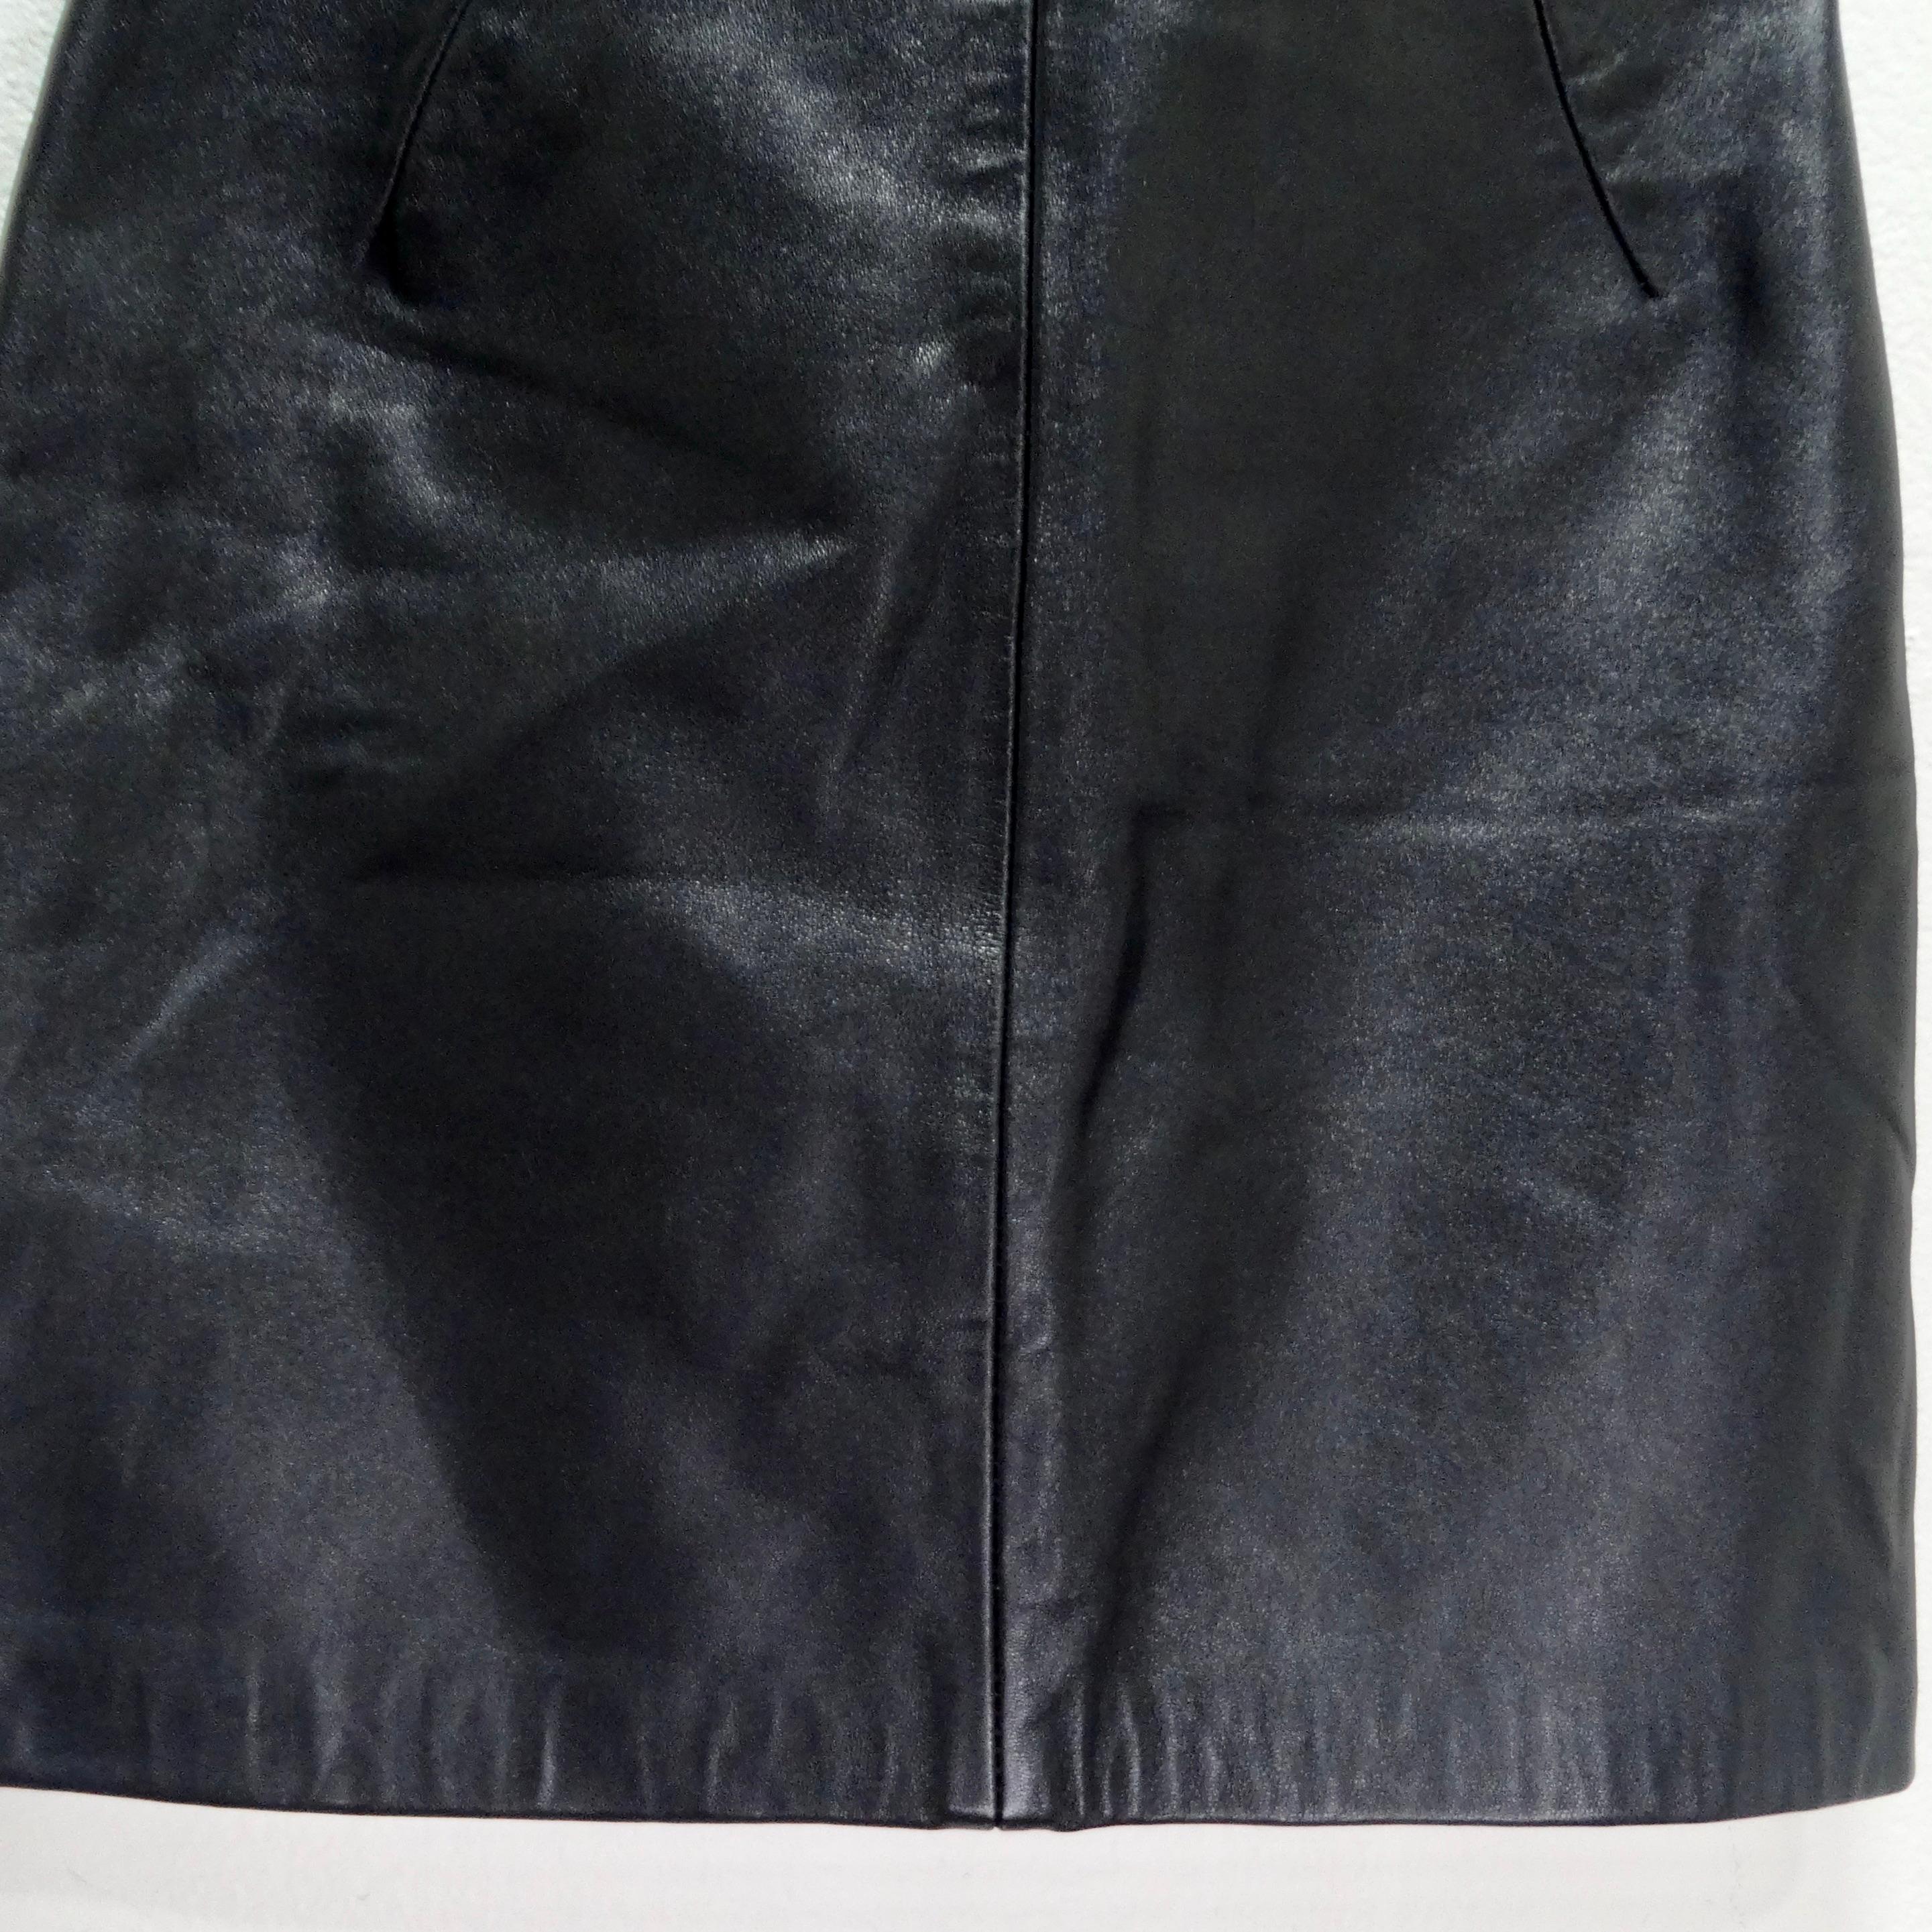 Michael Hoban 1980s Black Leather Mini Skirt In Excellent Condition For Sale In Scottsdale, AZ